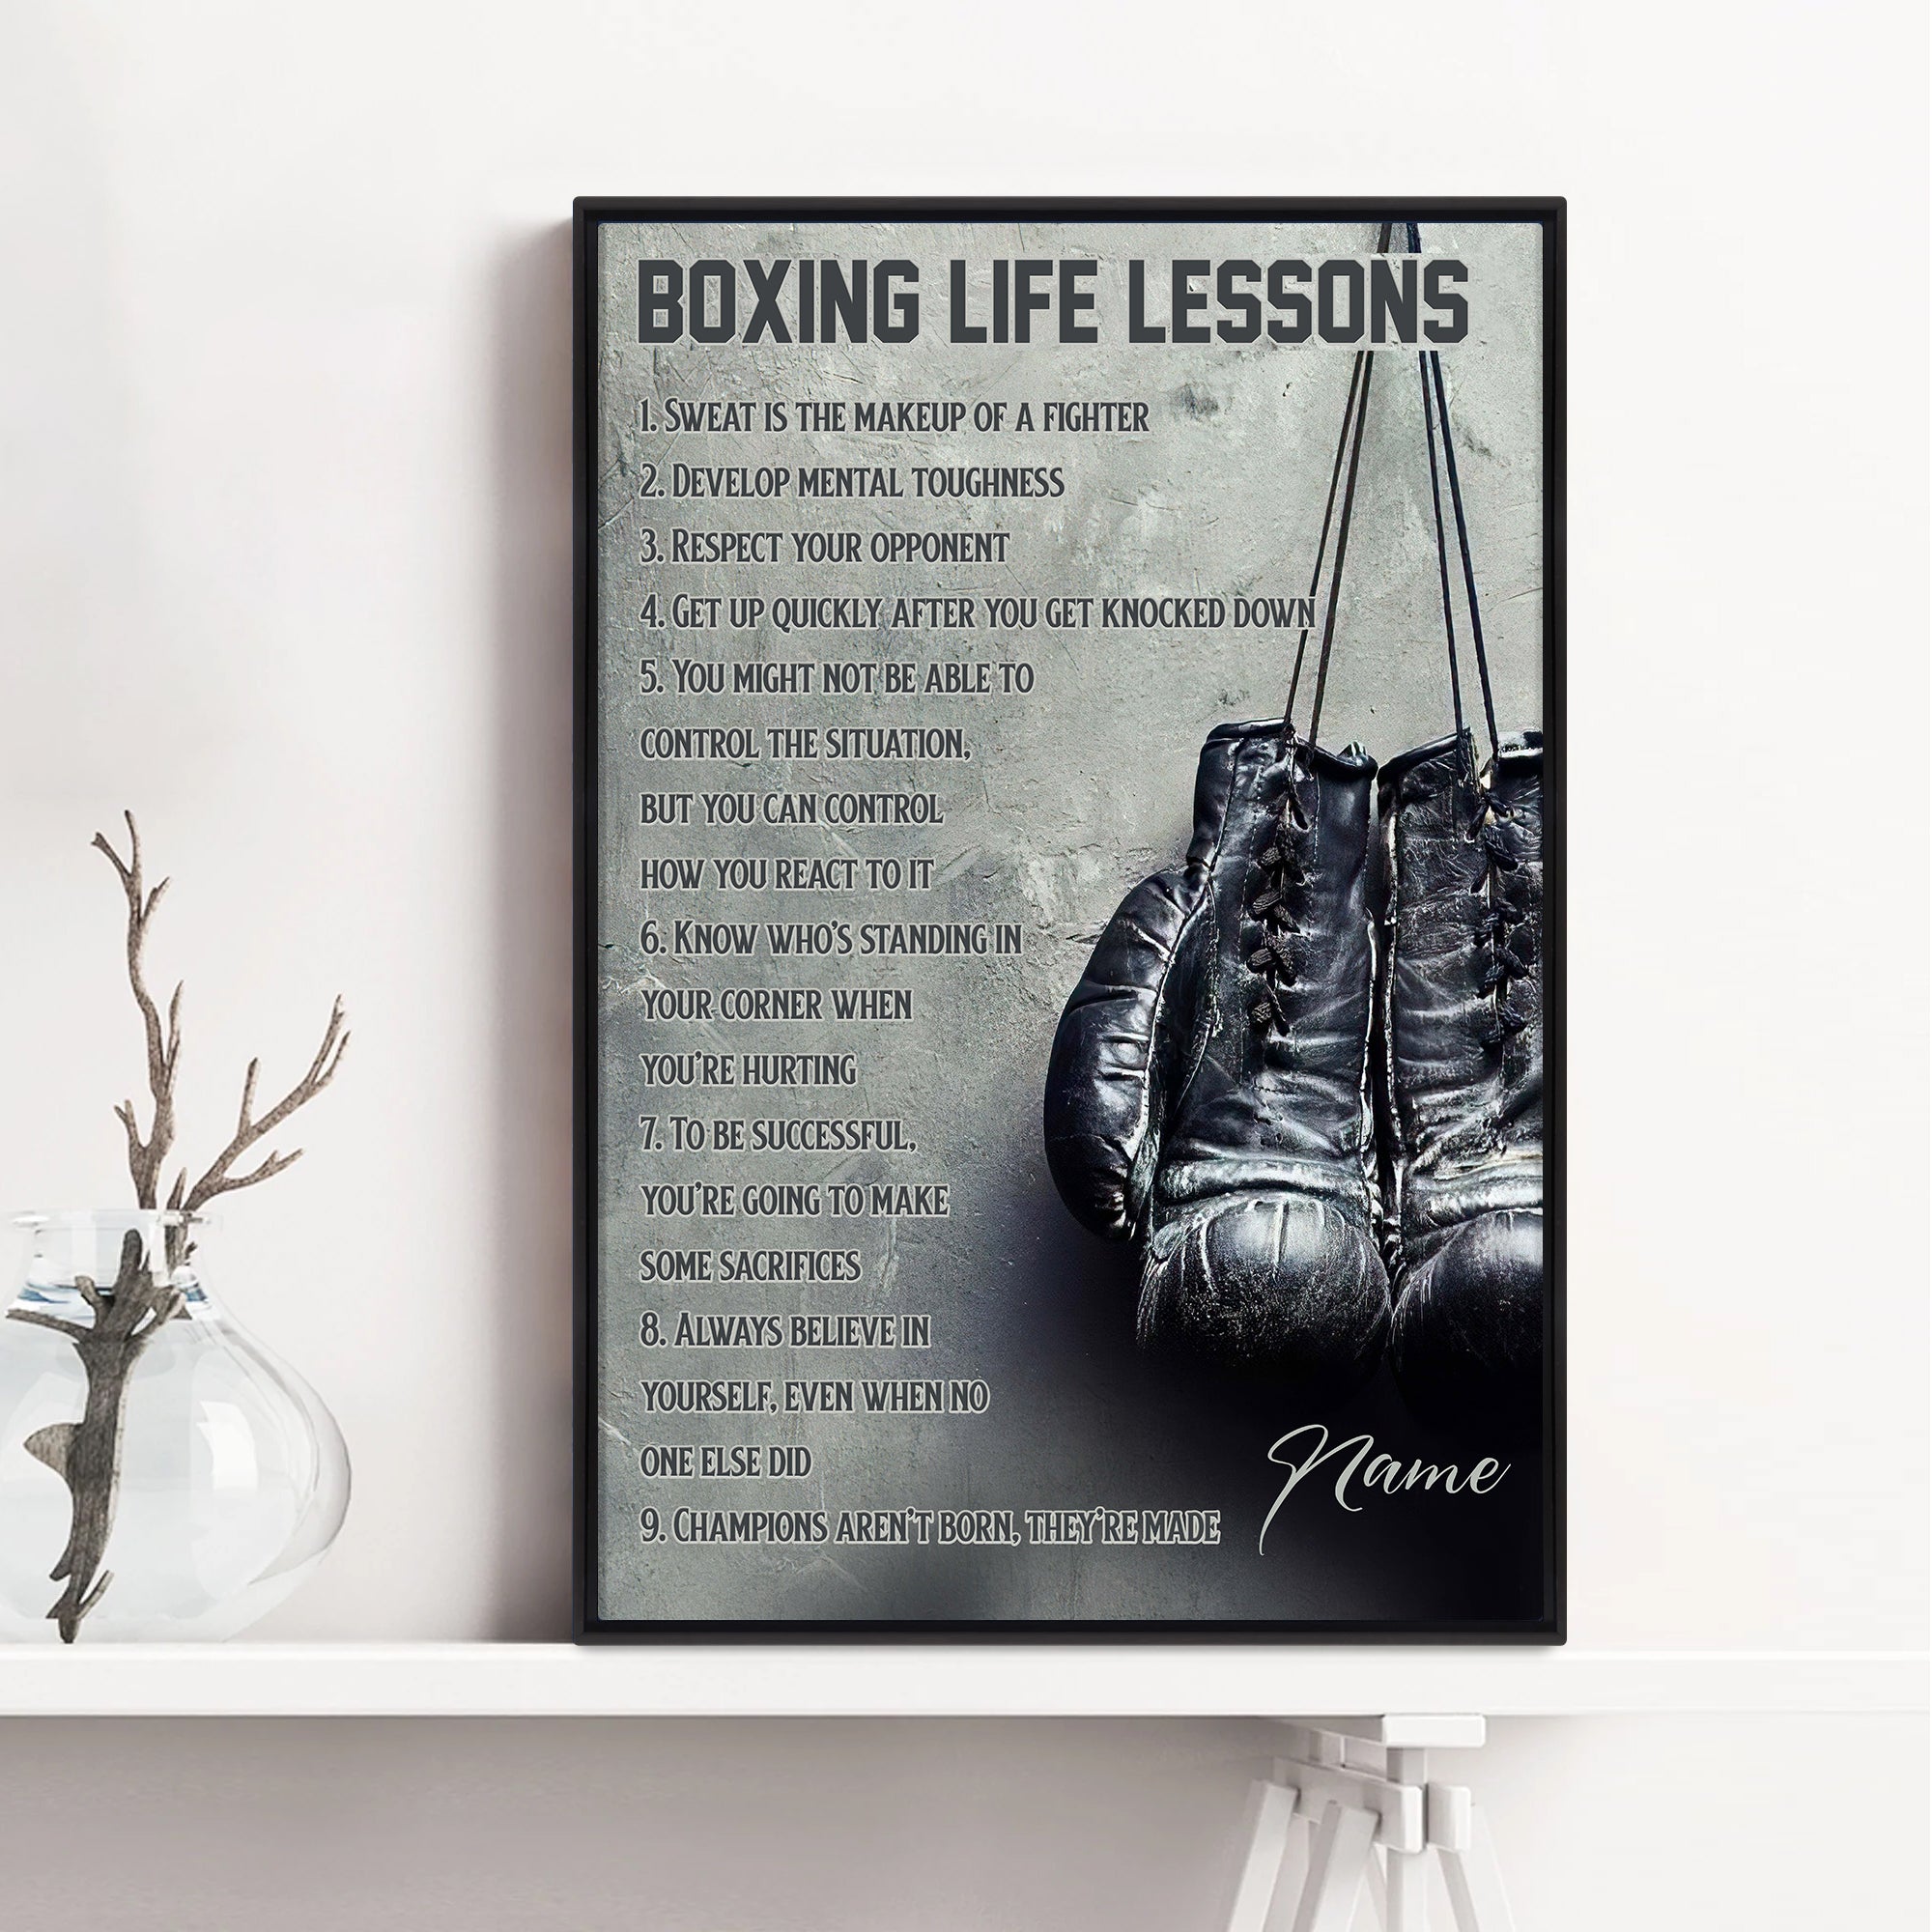 Personalized Boxing Poster & Canvas, Boxing Life Lessons Wall Art